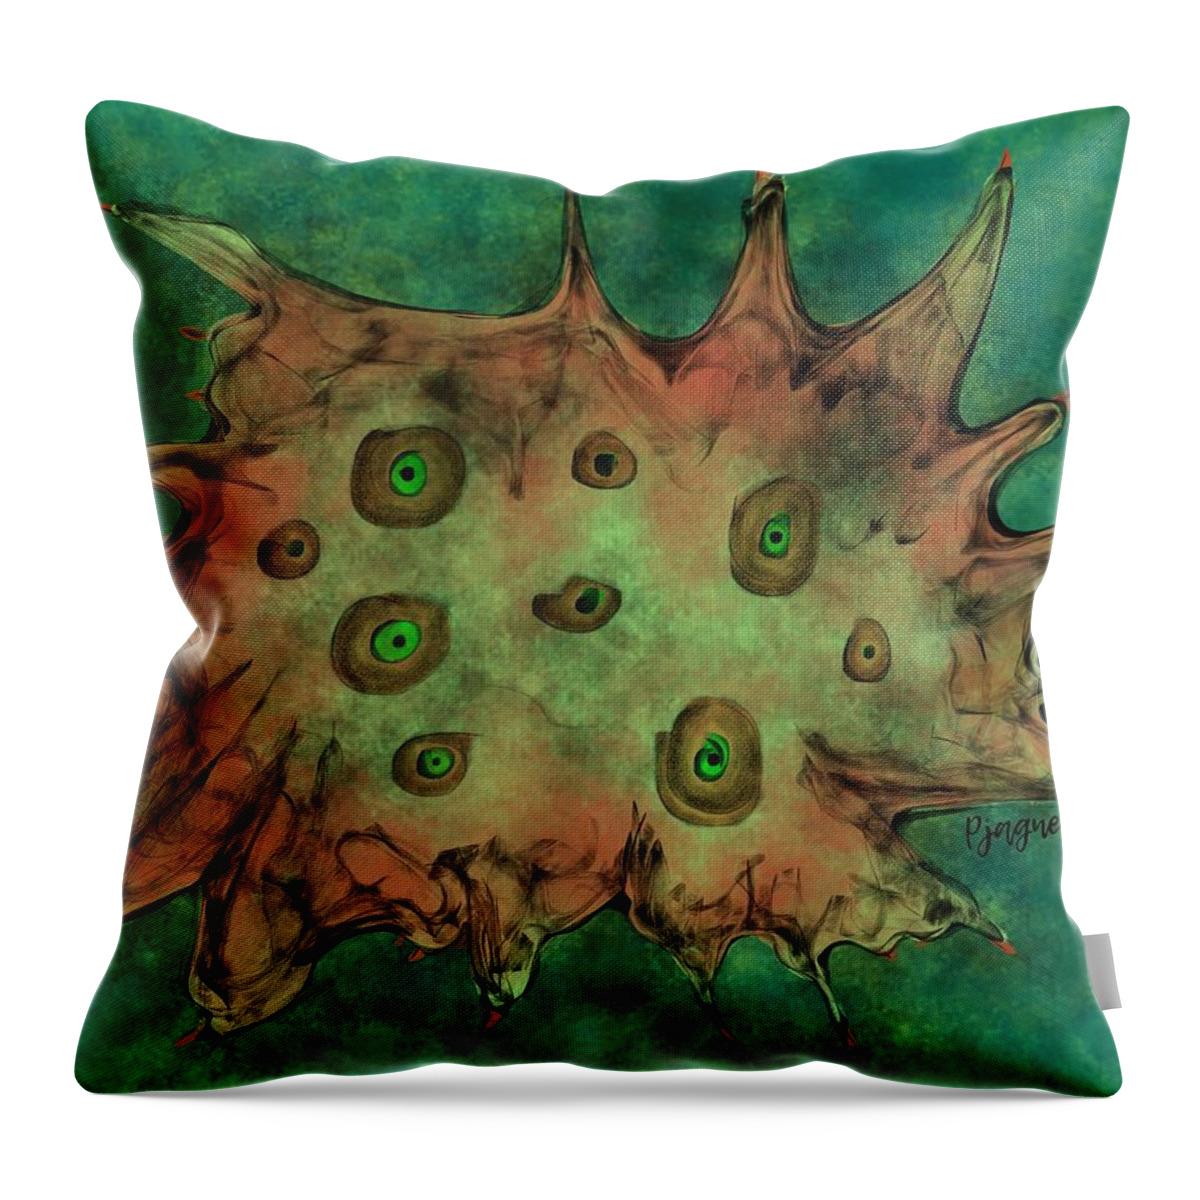 Green Throw Pillow featuring the digital art To be cellular by Ljev Rjadcenko